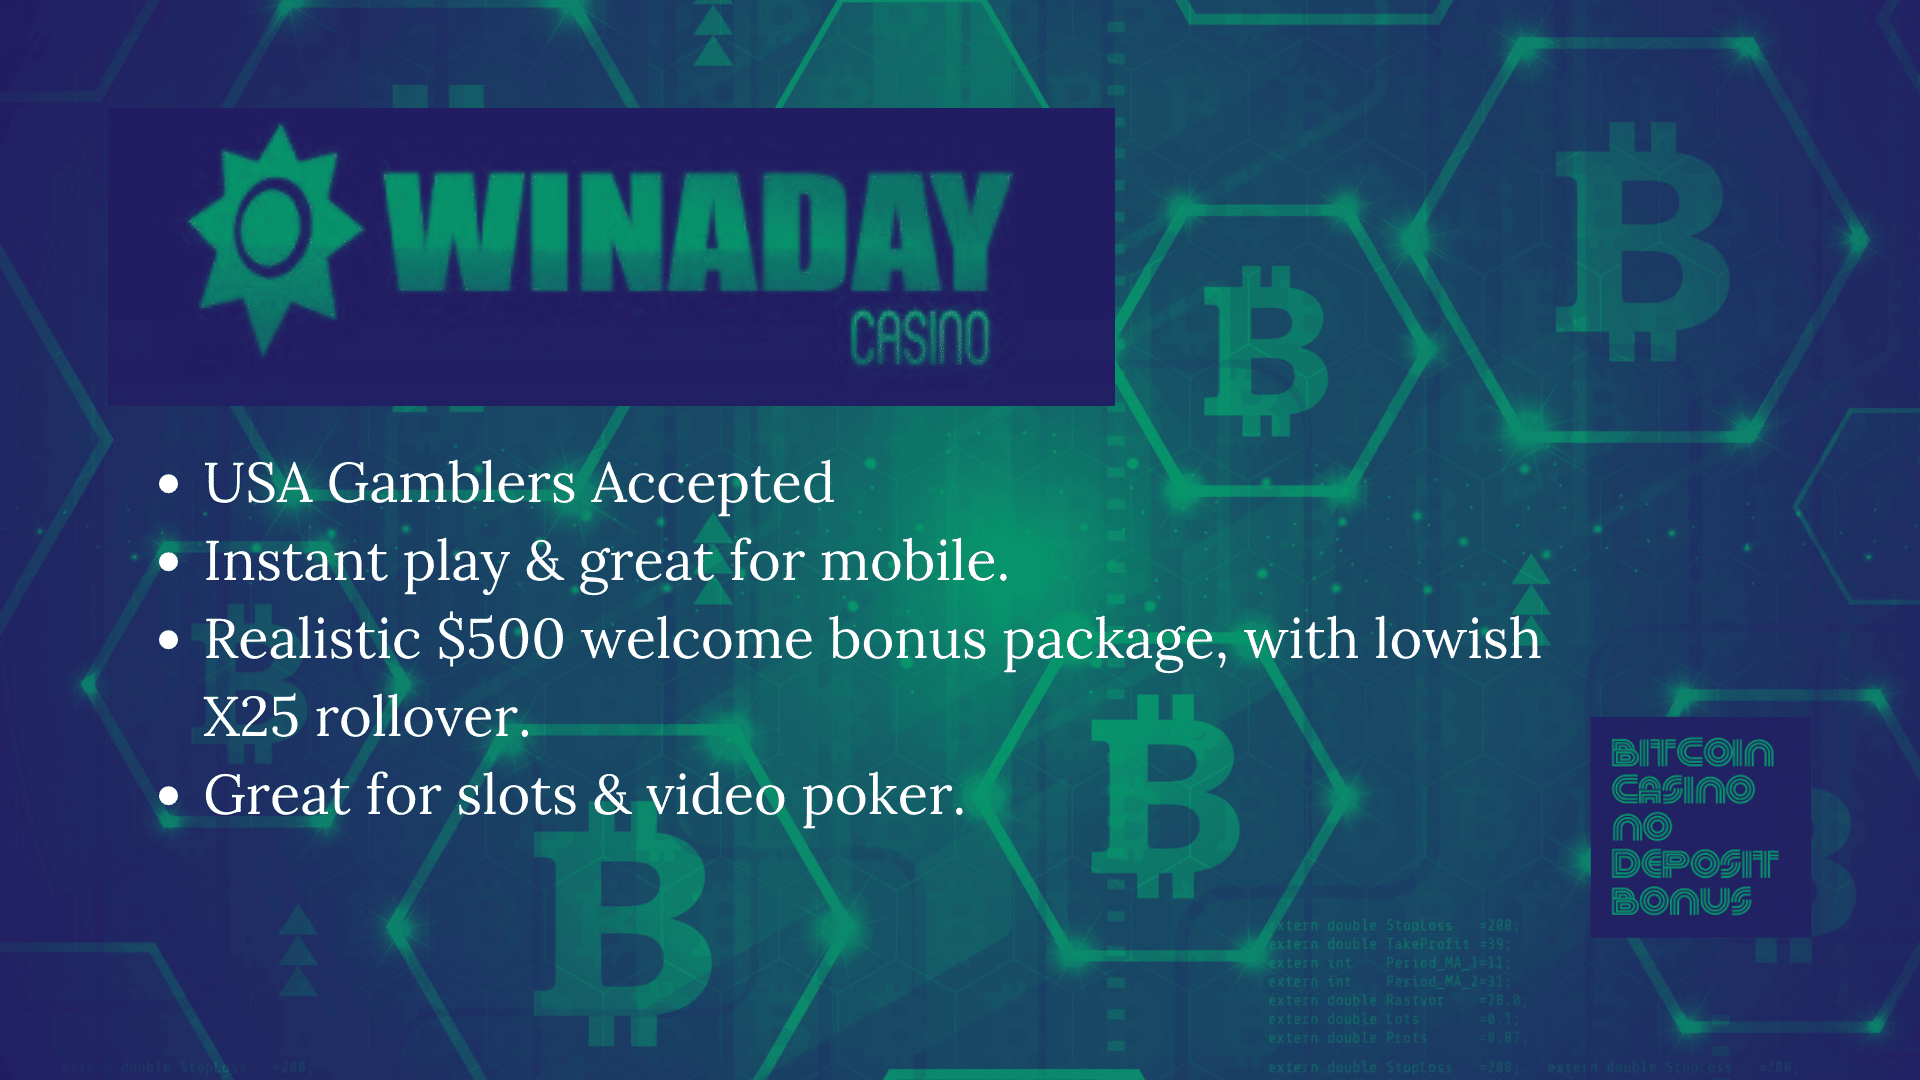 You are currently viewing Win A Day Casino No Deposit Bonus Codes September 2022 – Winadaycasino.eu Coupons